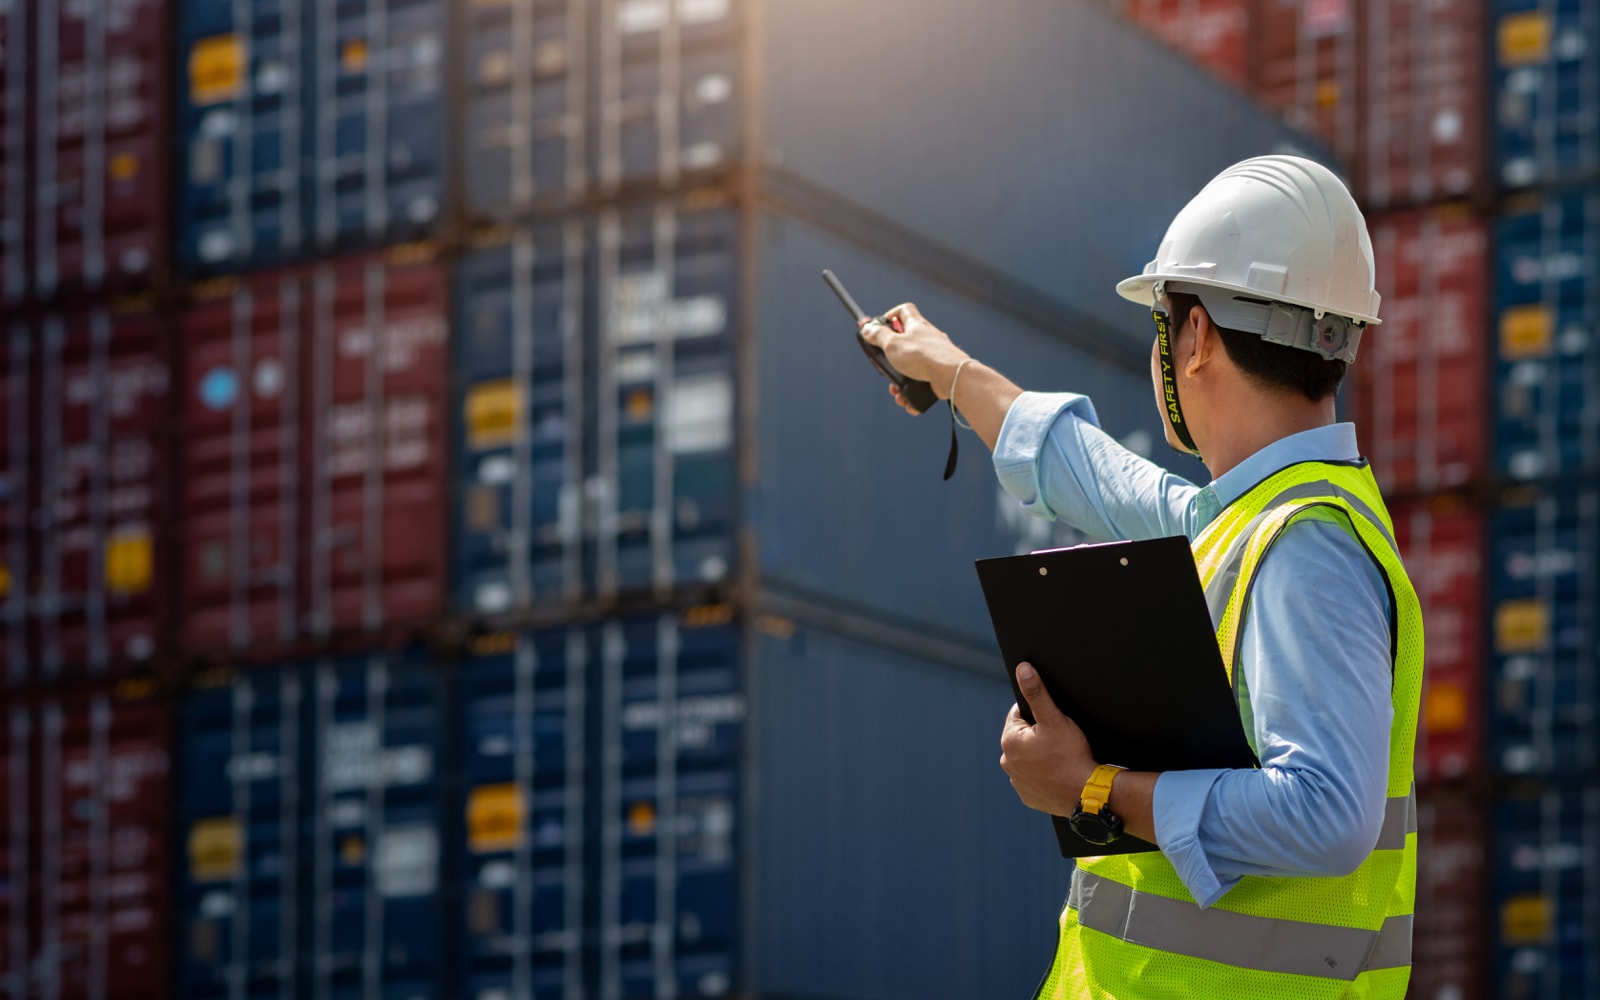 Shipping controller on loading dock with shipping containers